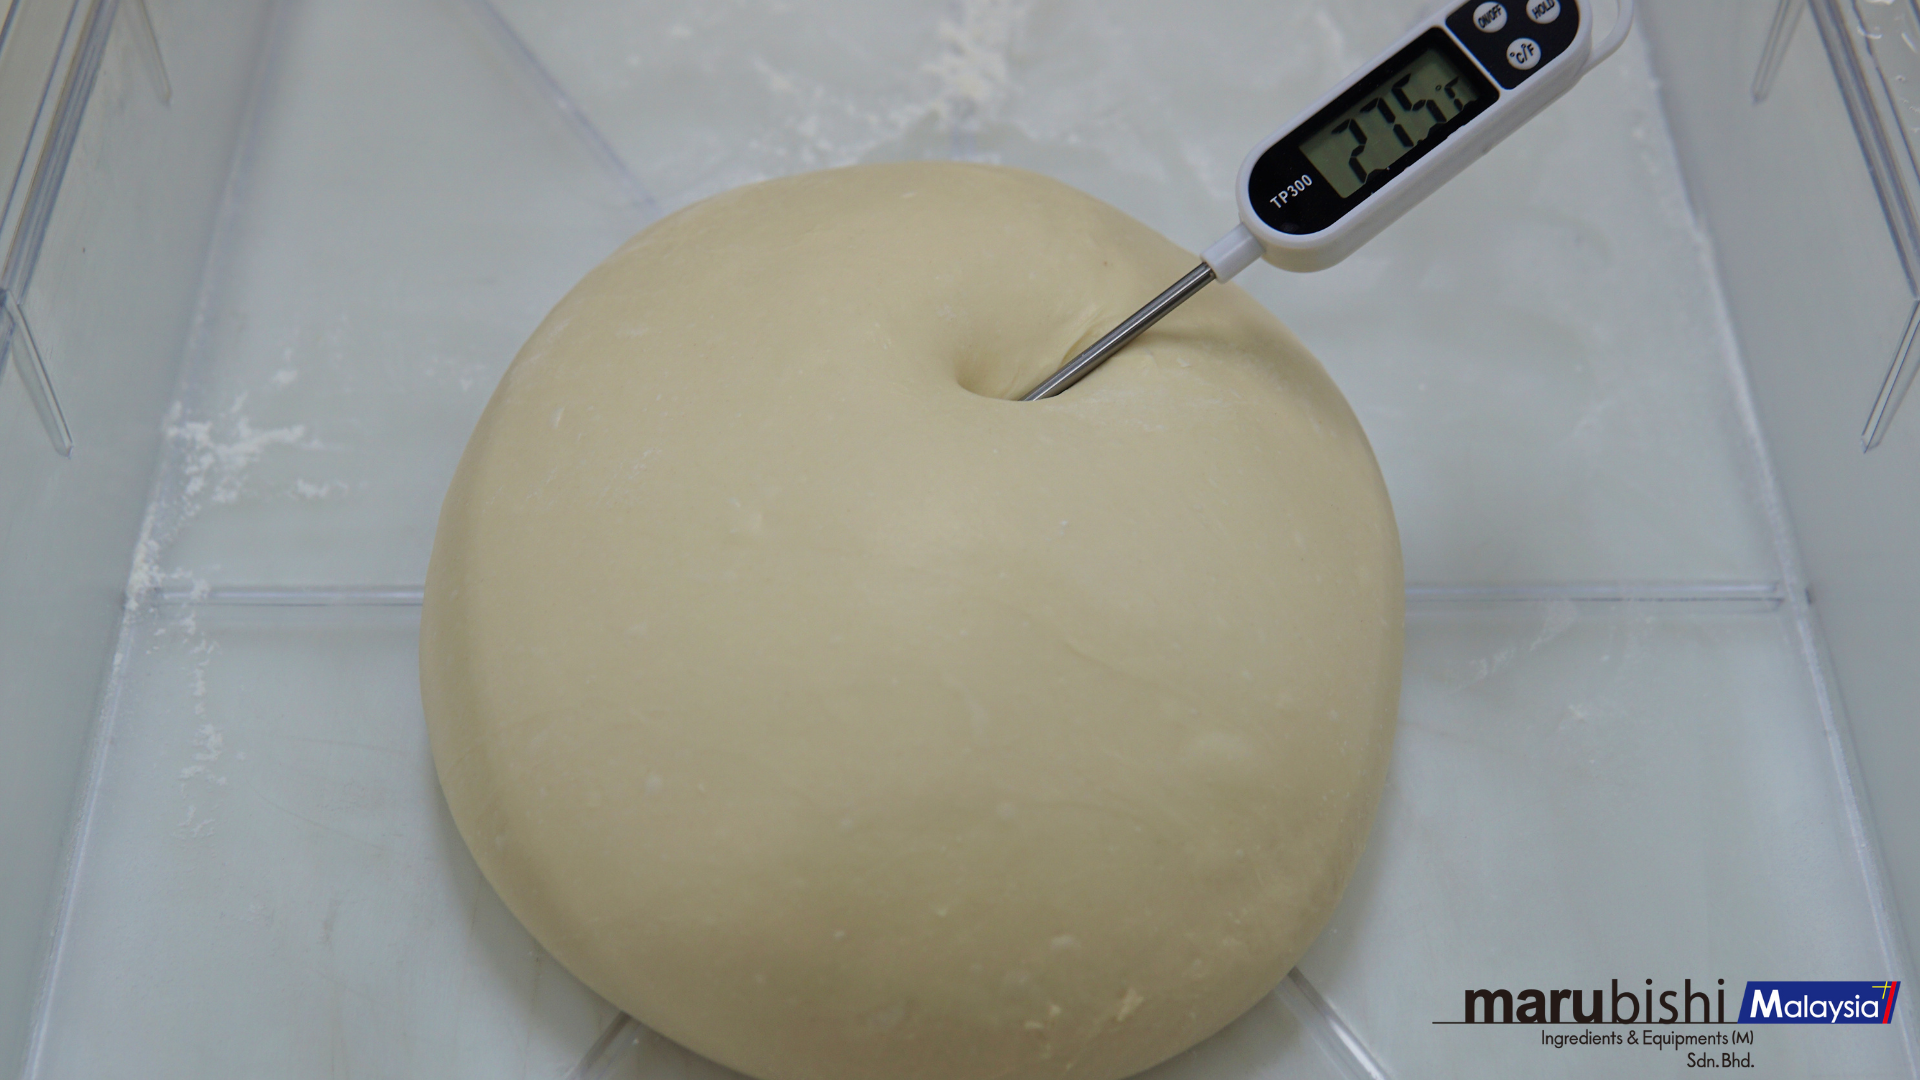 The Importance of Dough Temperature in Baking